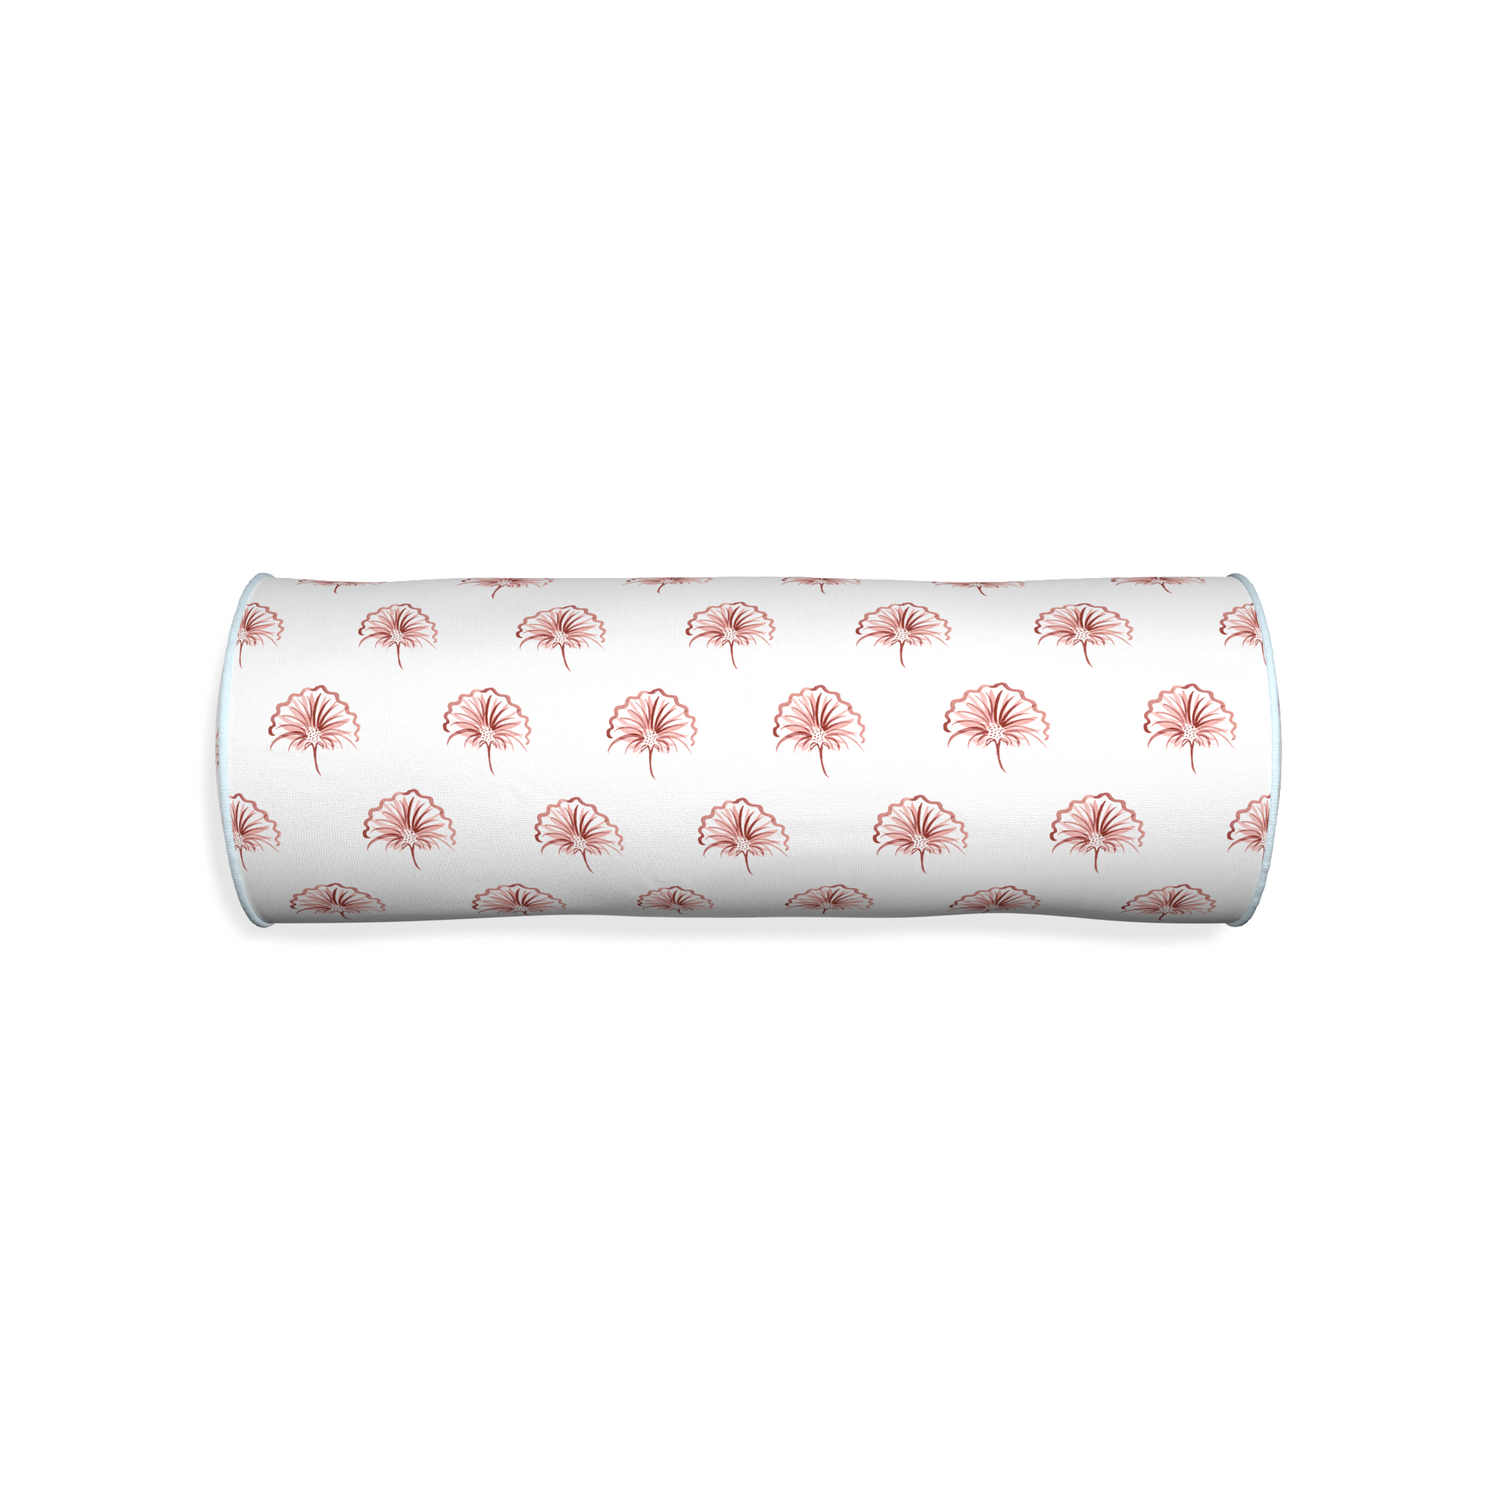 Bolster penelope rose custom floral pinkpillow with powder piping on white background